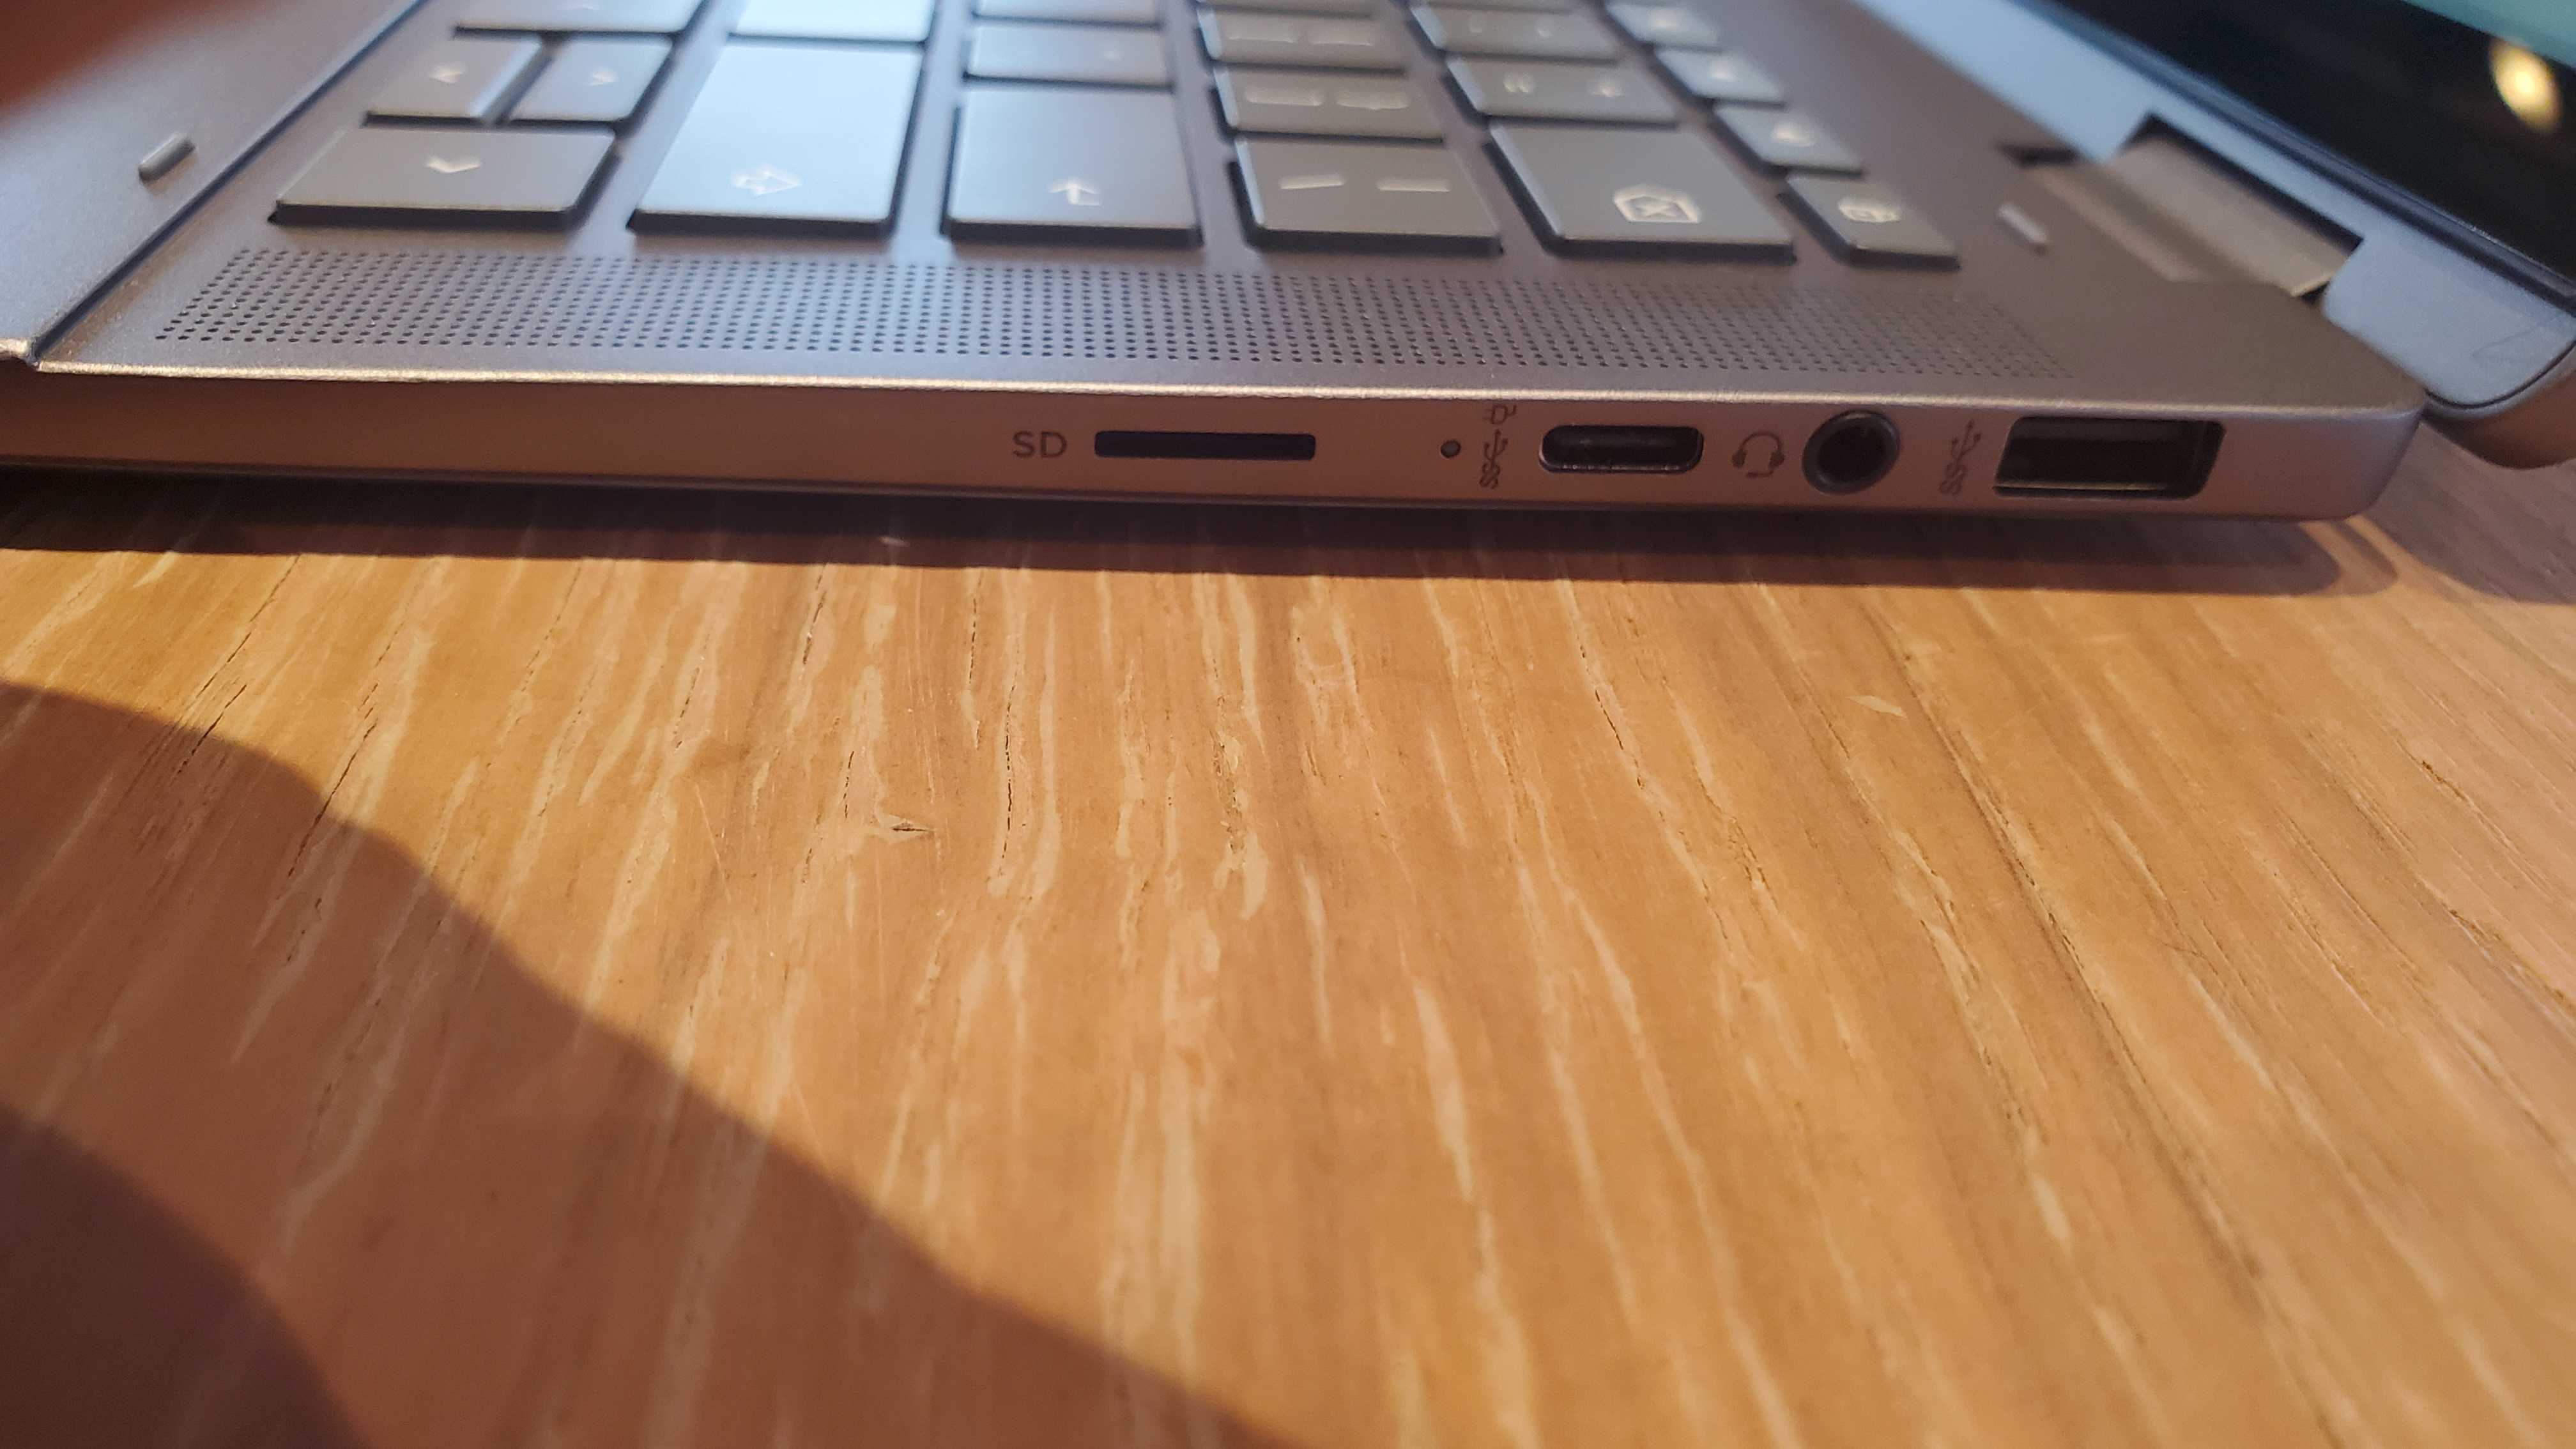 Chromebook Plus laptop on wooden table